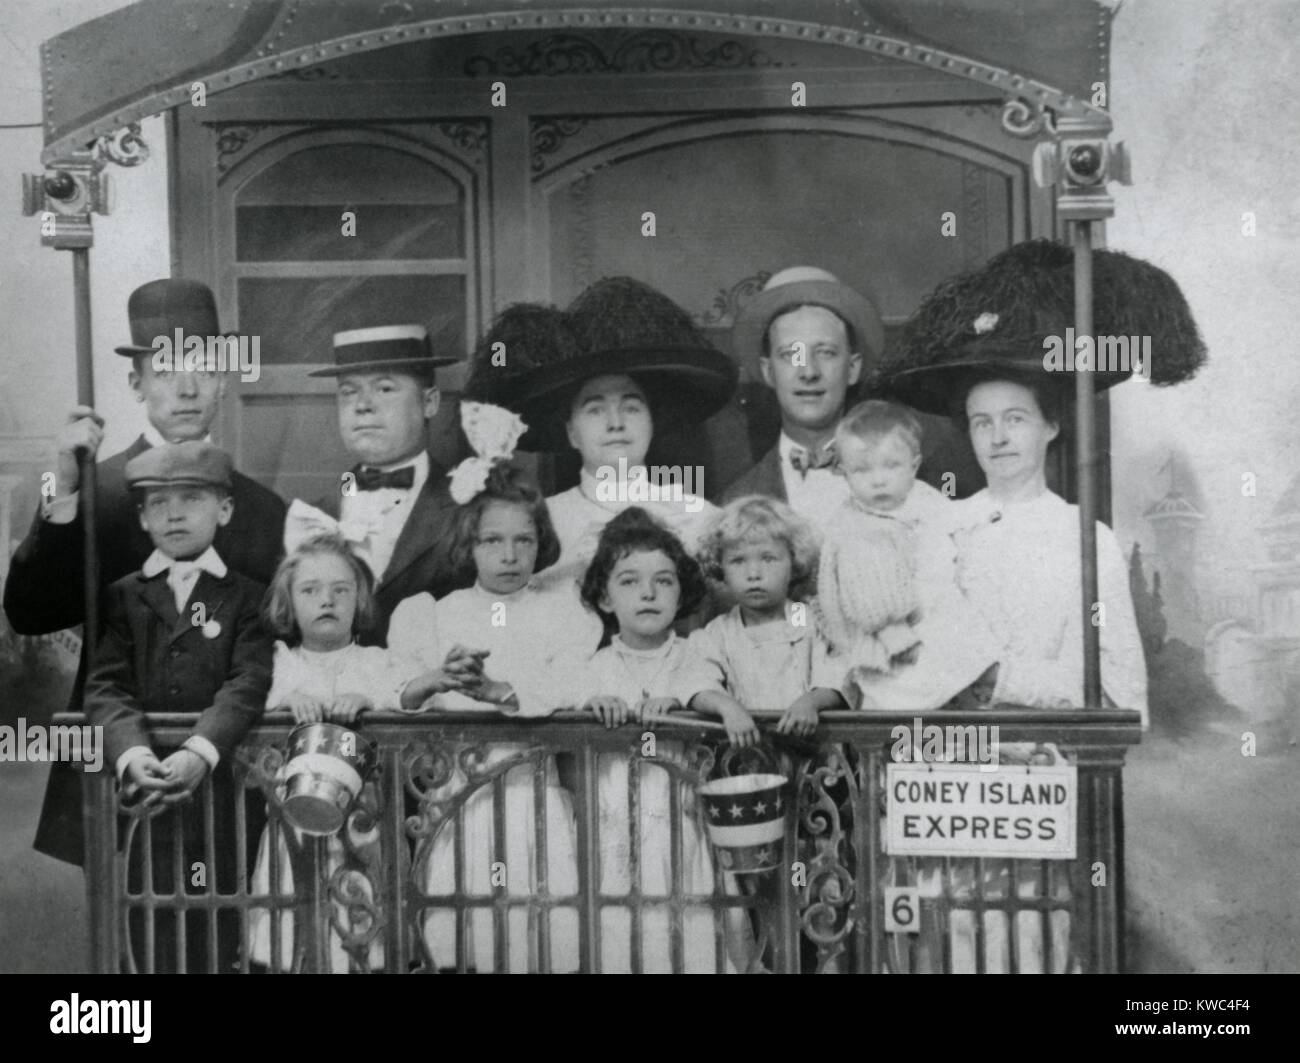 Alfred E. Smith and friends in a staged Studio Portrait, on 'The Coney Island Express.' Ca. 1910. Smith was then a member of the New York State Assembly, serving New York County's 2nd District from 1904 to 1915. (BSLOC 2015 15 203) Stock Photo